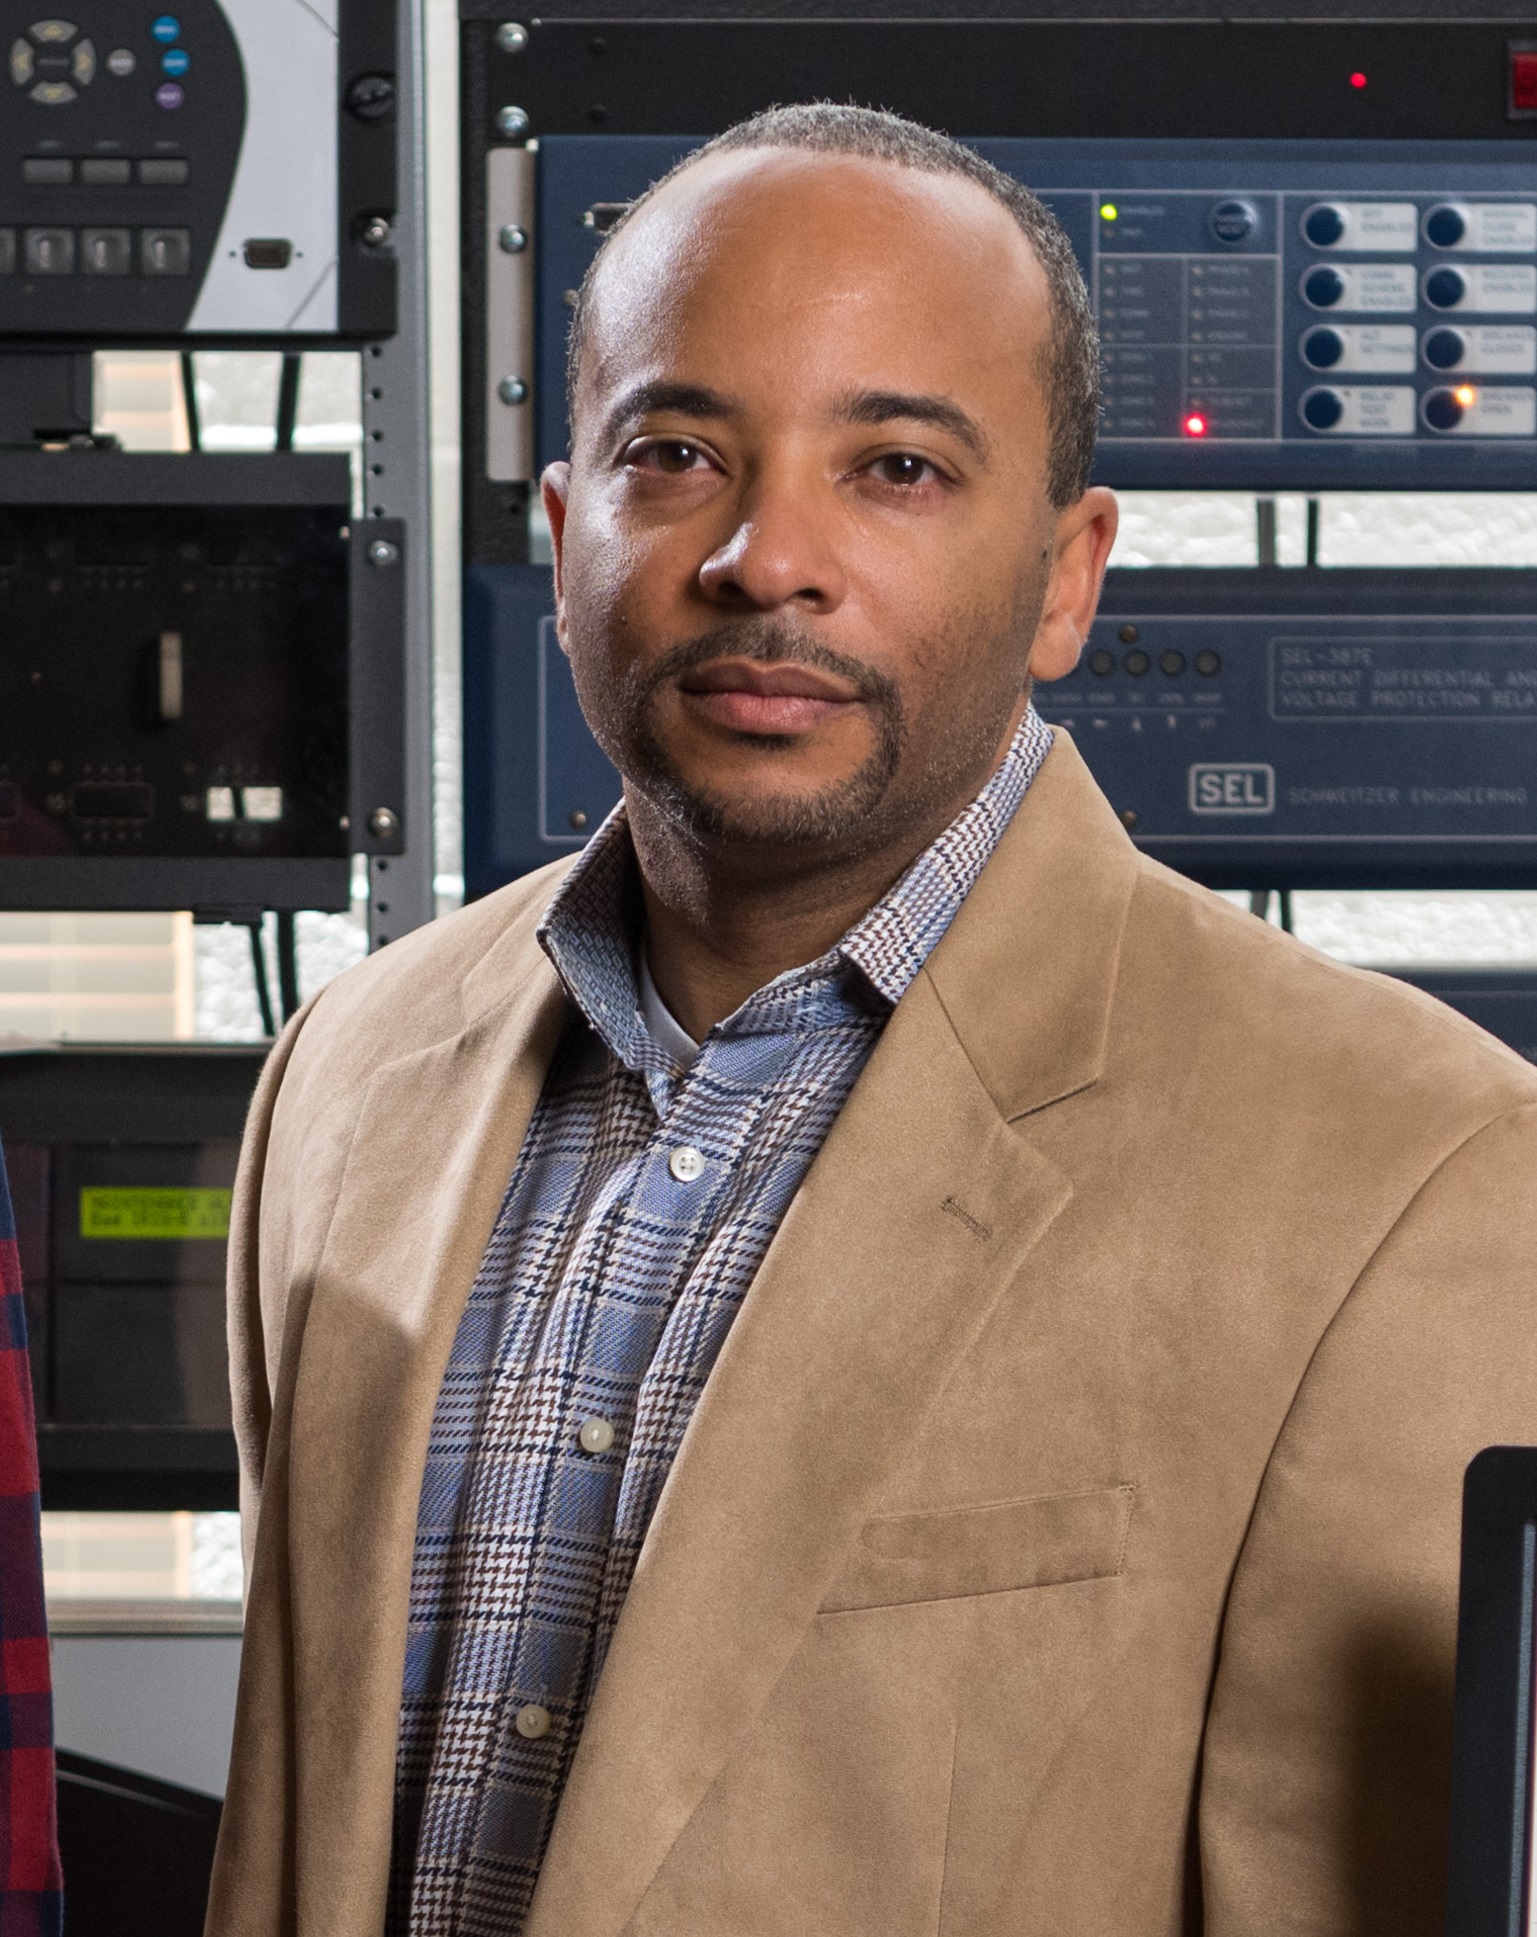 A study of cloud hosting services has found that as many as 10 percent of the repositories hosted by them have been compromised. Shown is Georgia Tech professor Raheem Beyah, who led the research. (Credit: Rob Felt, Georgia Tech)